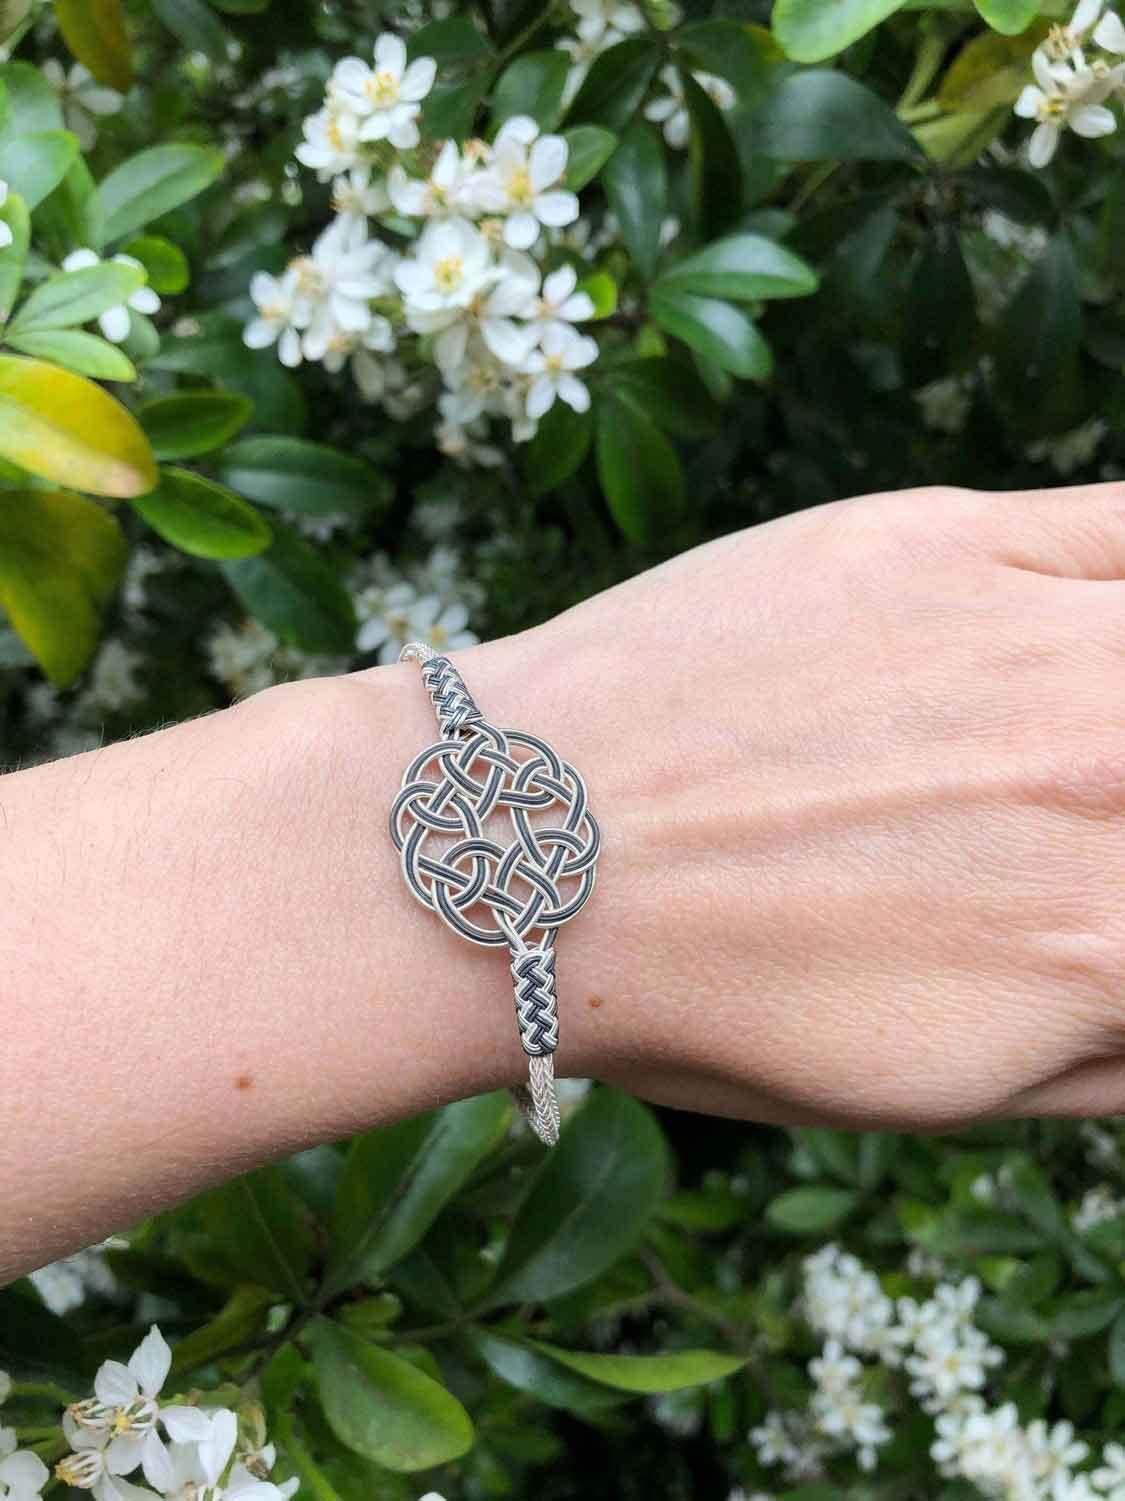 Handcrafted Celtic Knot Braided Bracelet - Elegant Handcrafted Silver Accessory Wonderful Gift available at Moyoni Design